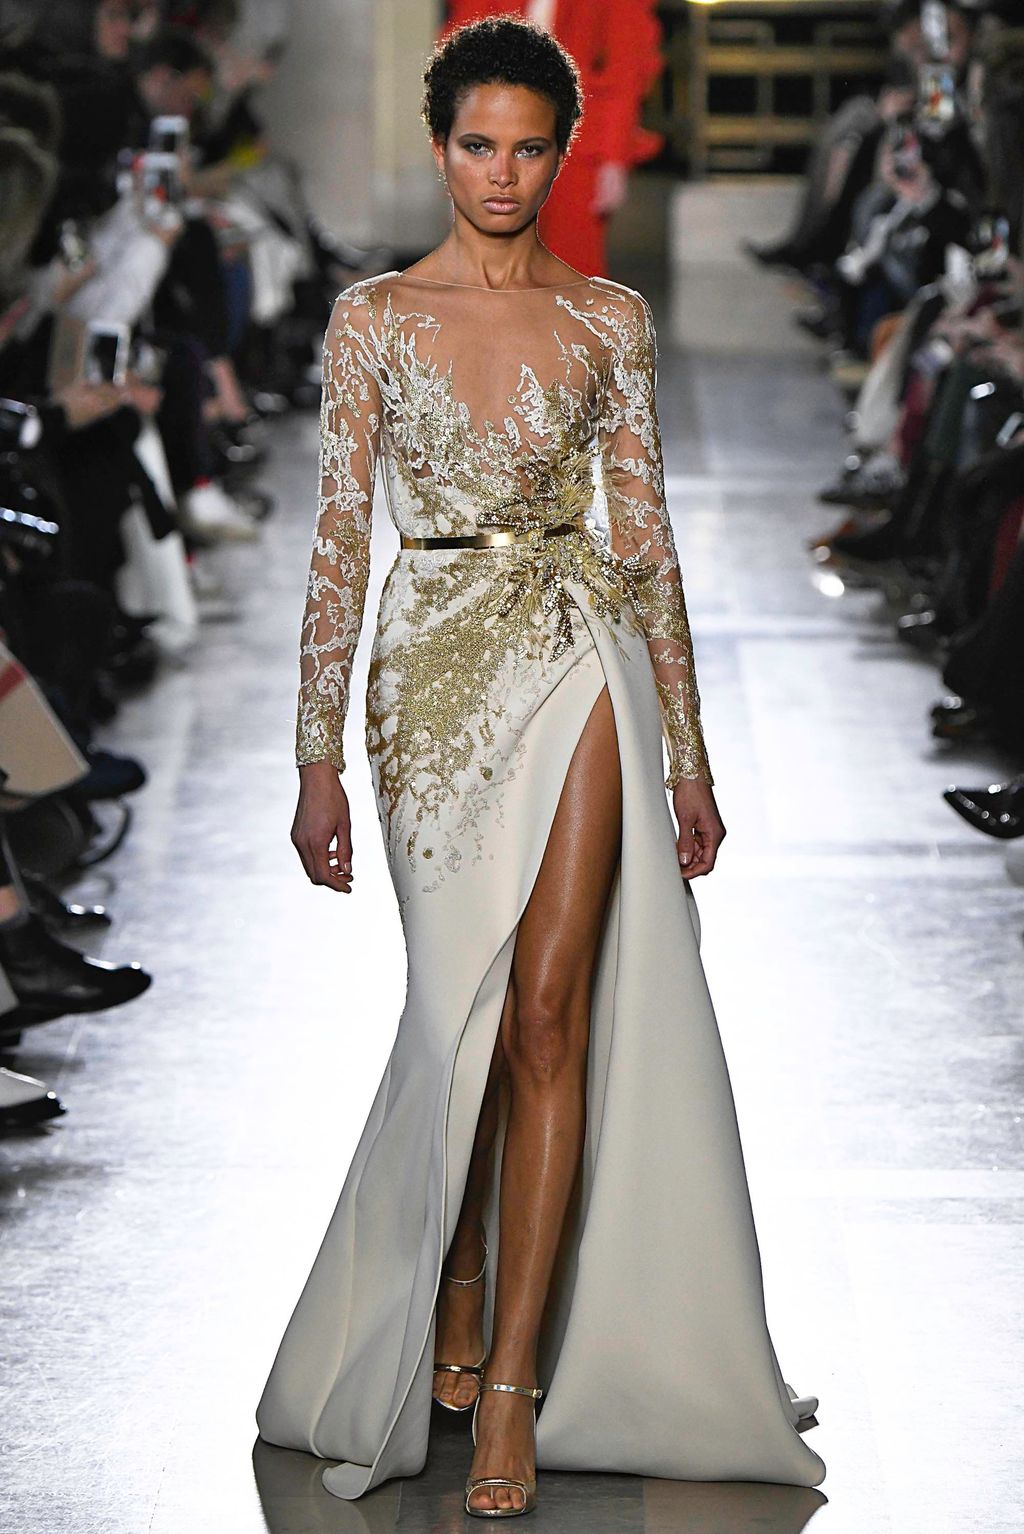 Elie Saab S/S19 couture #25 - Tagwalk: The Fashion Search Engine